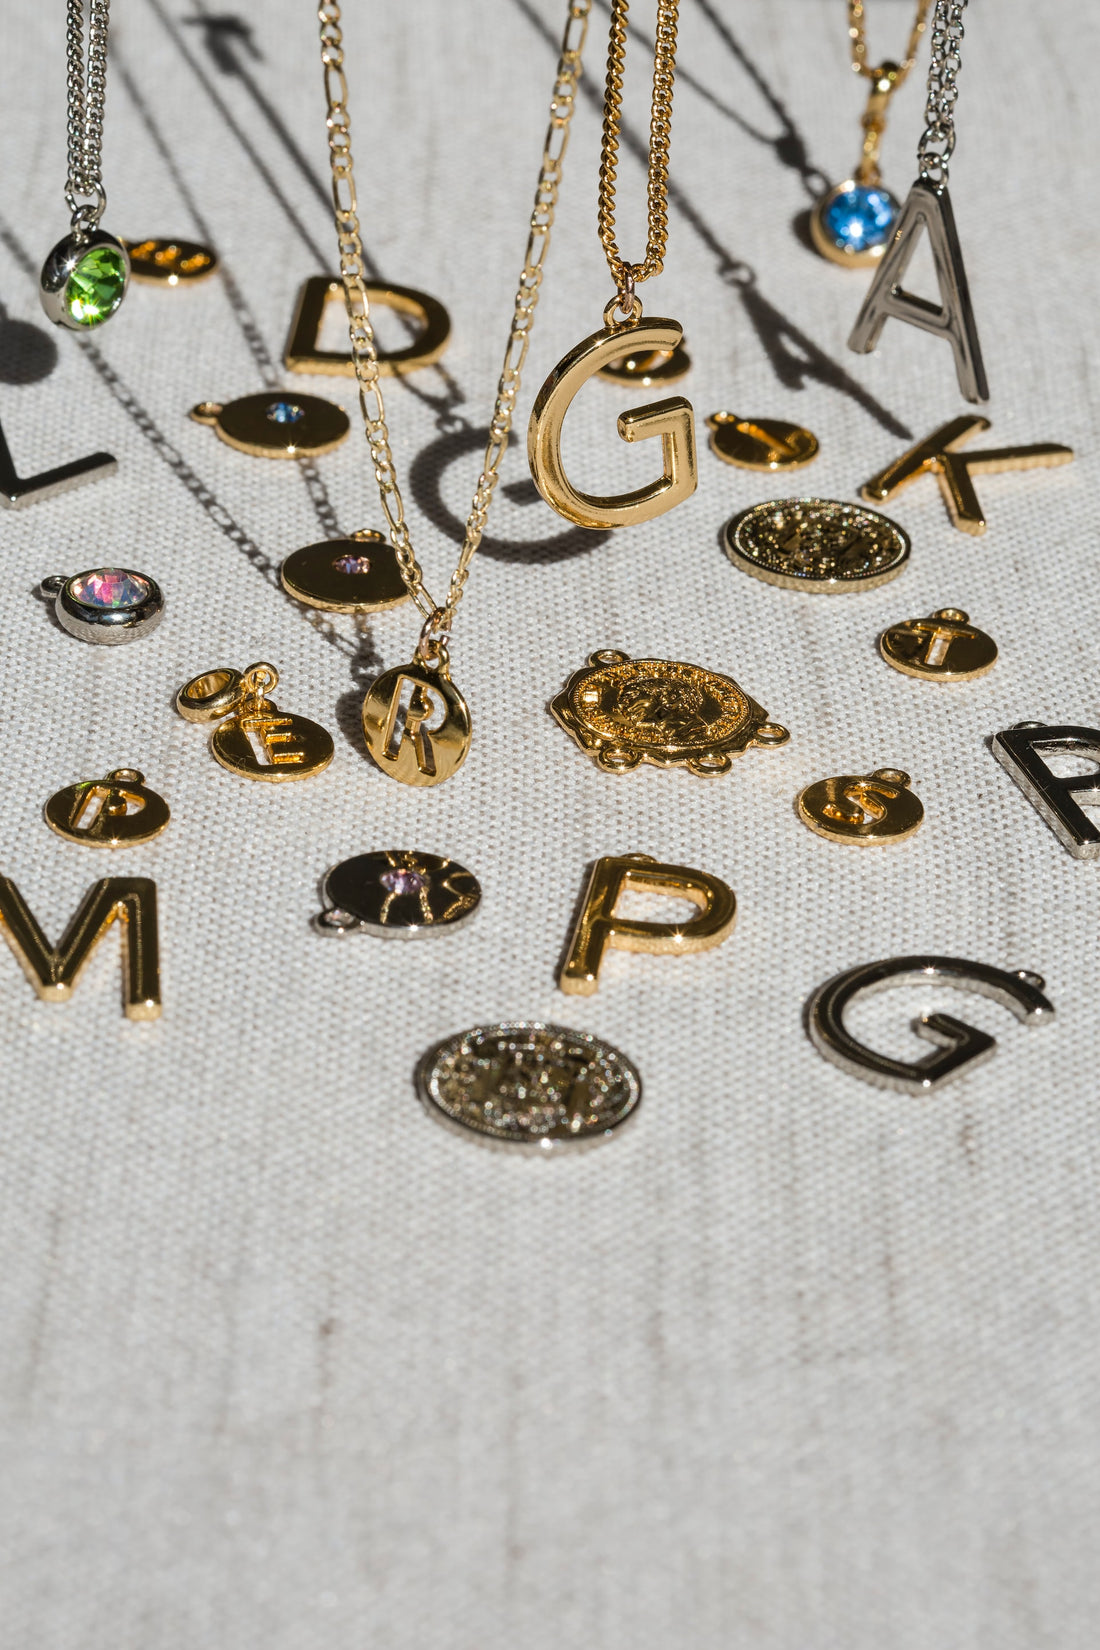 Why Initial Necklaces are Taking the Fashion World By Storm